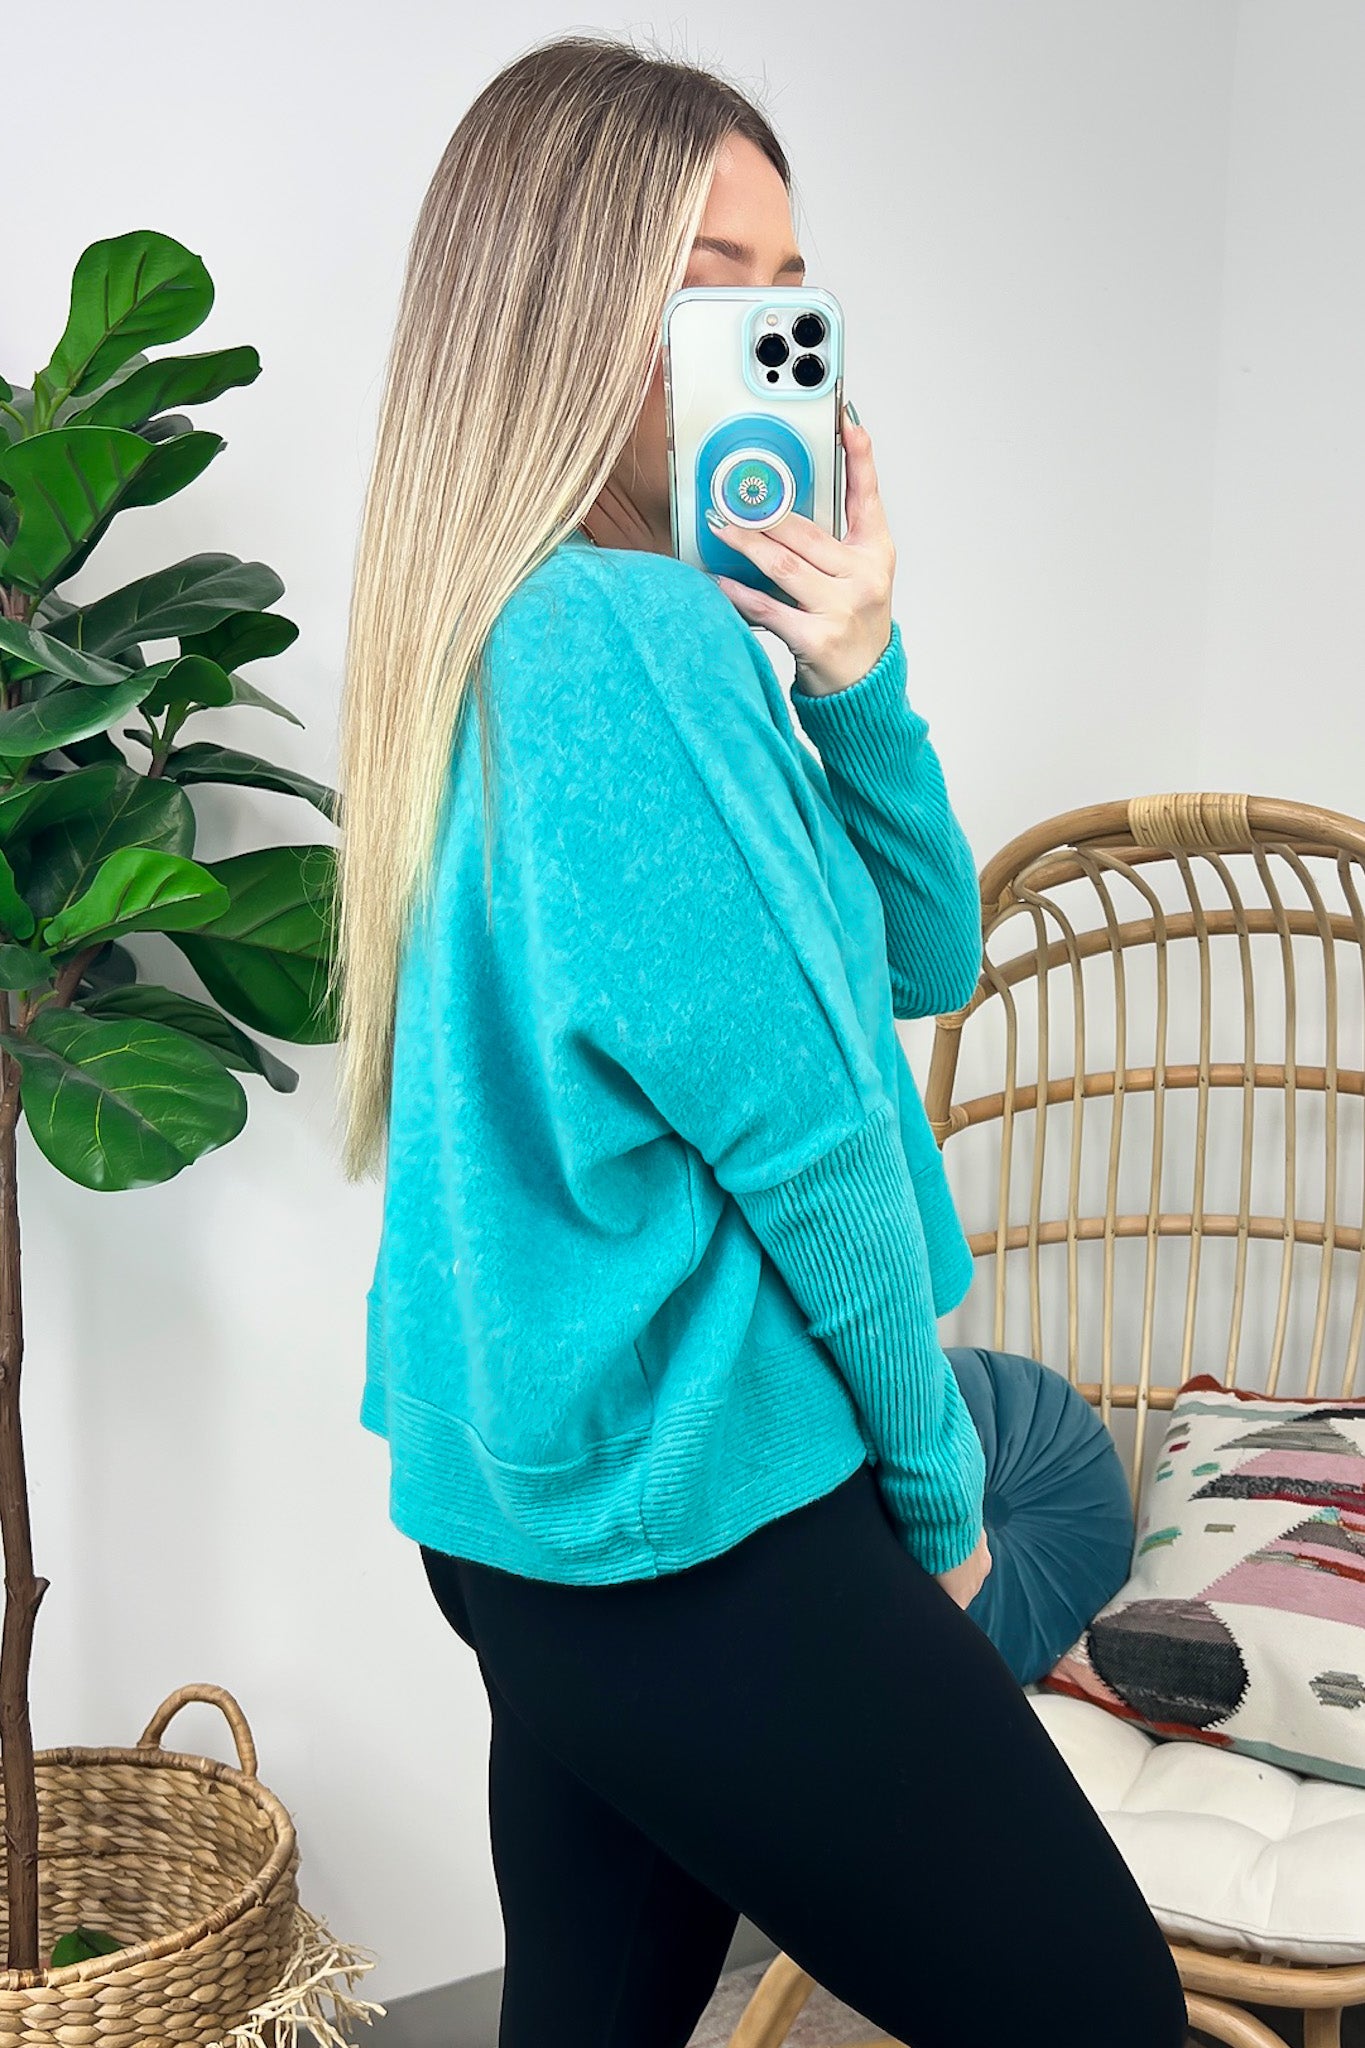  Adelaida Soft Knit Dolman Sleeve Sweater - BACK IN STOCK - Madison and Mallory